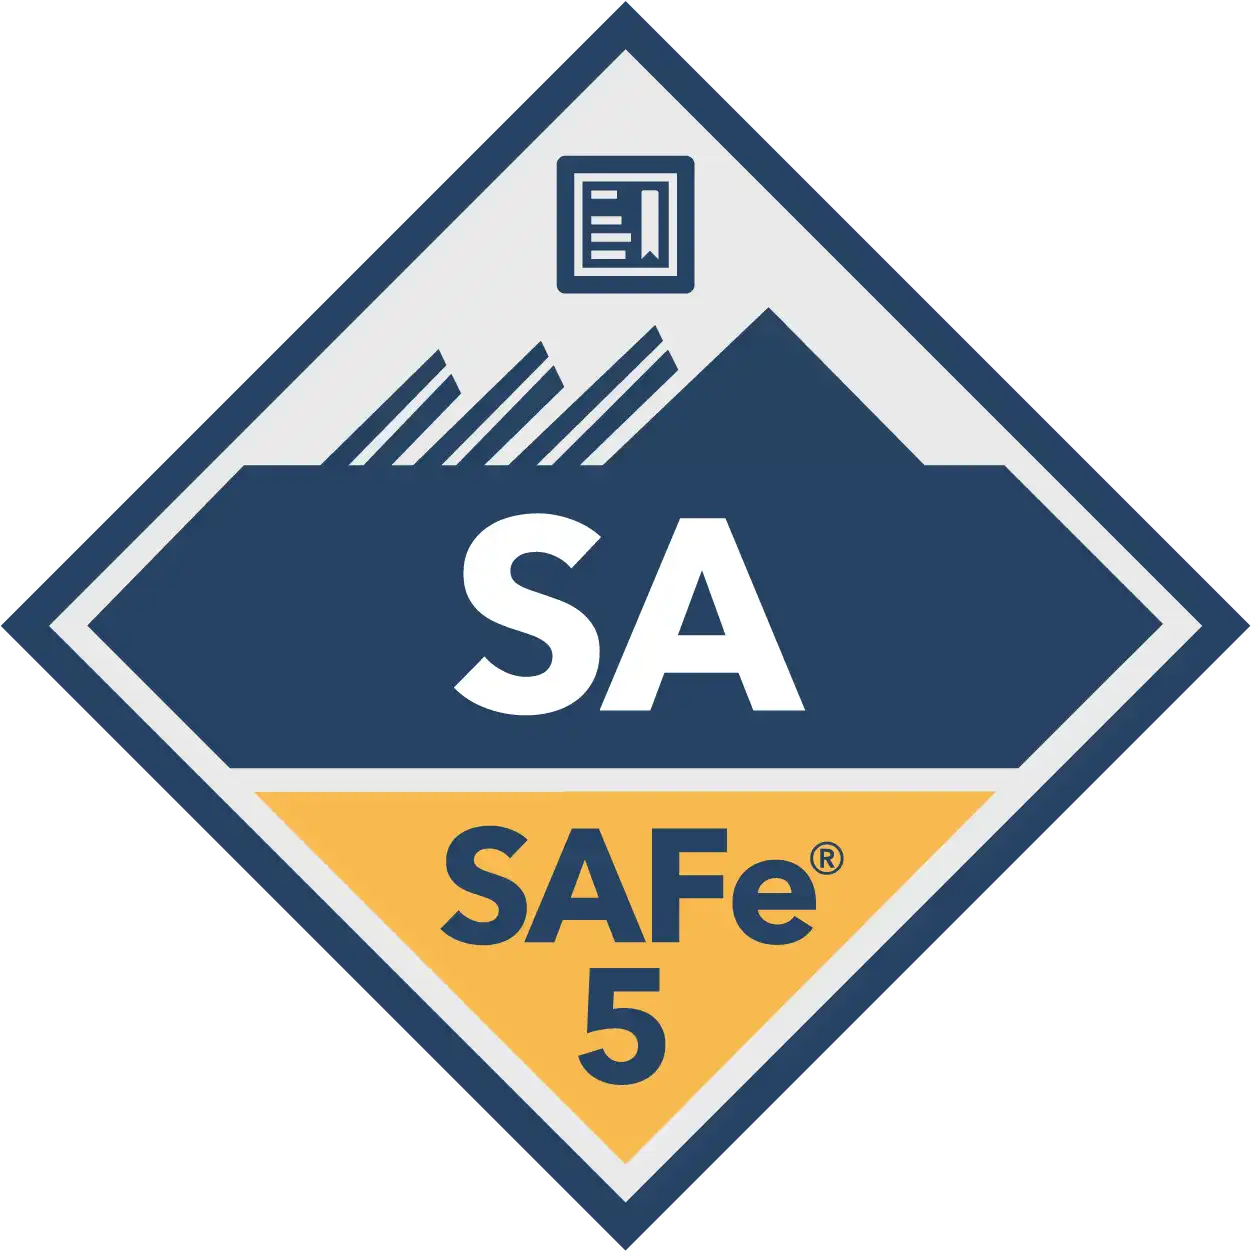 Certified SAFe® 5 Agilist,A Certified SAFe® 5 Agilist (SA) is a SAFe enterprise leadership professional who is part of a Lean-Agile transformation. Key areas of competency include the application of Lean-Agile principles, execution and release of value through Agile Release Trains (ARTs), and building an Agile portfolio with Lean-Agile budgeting.